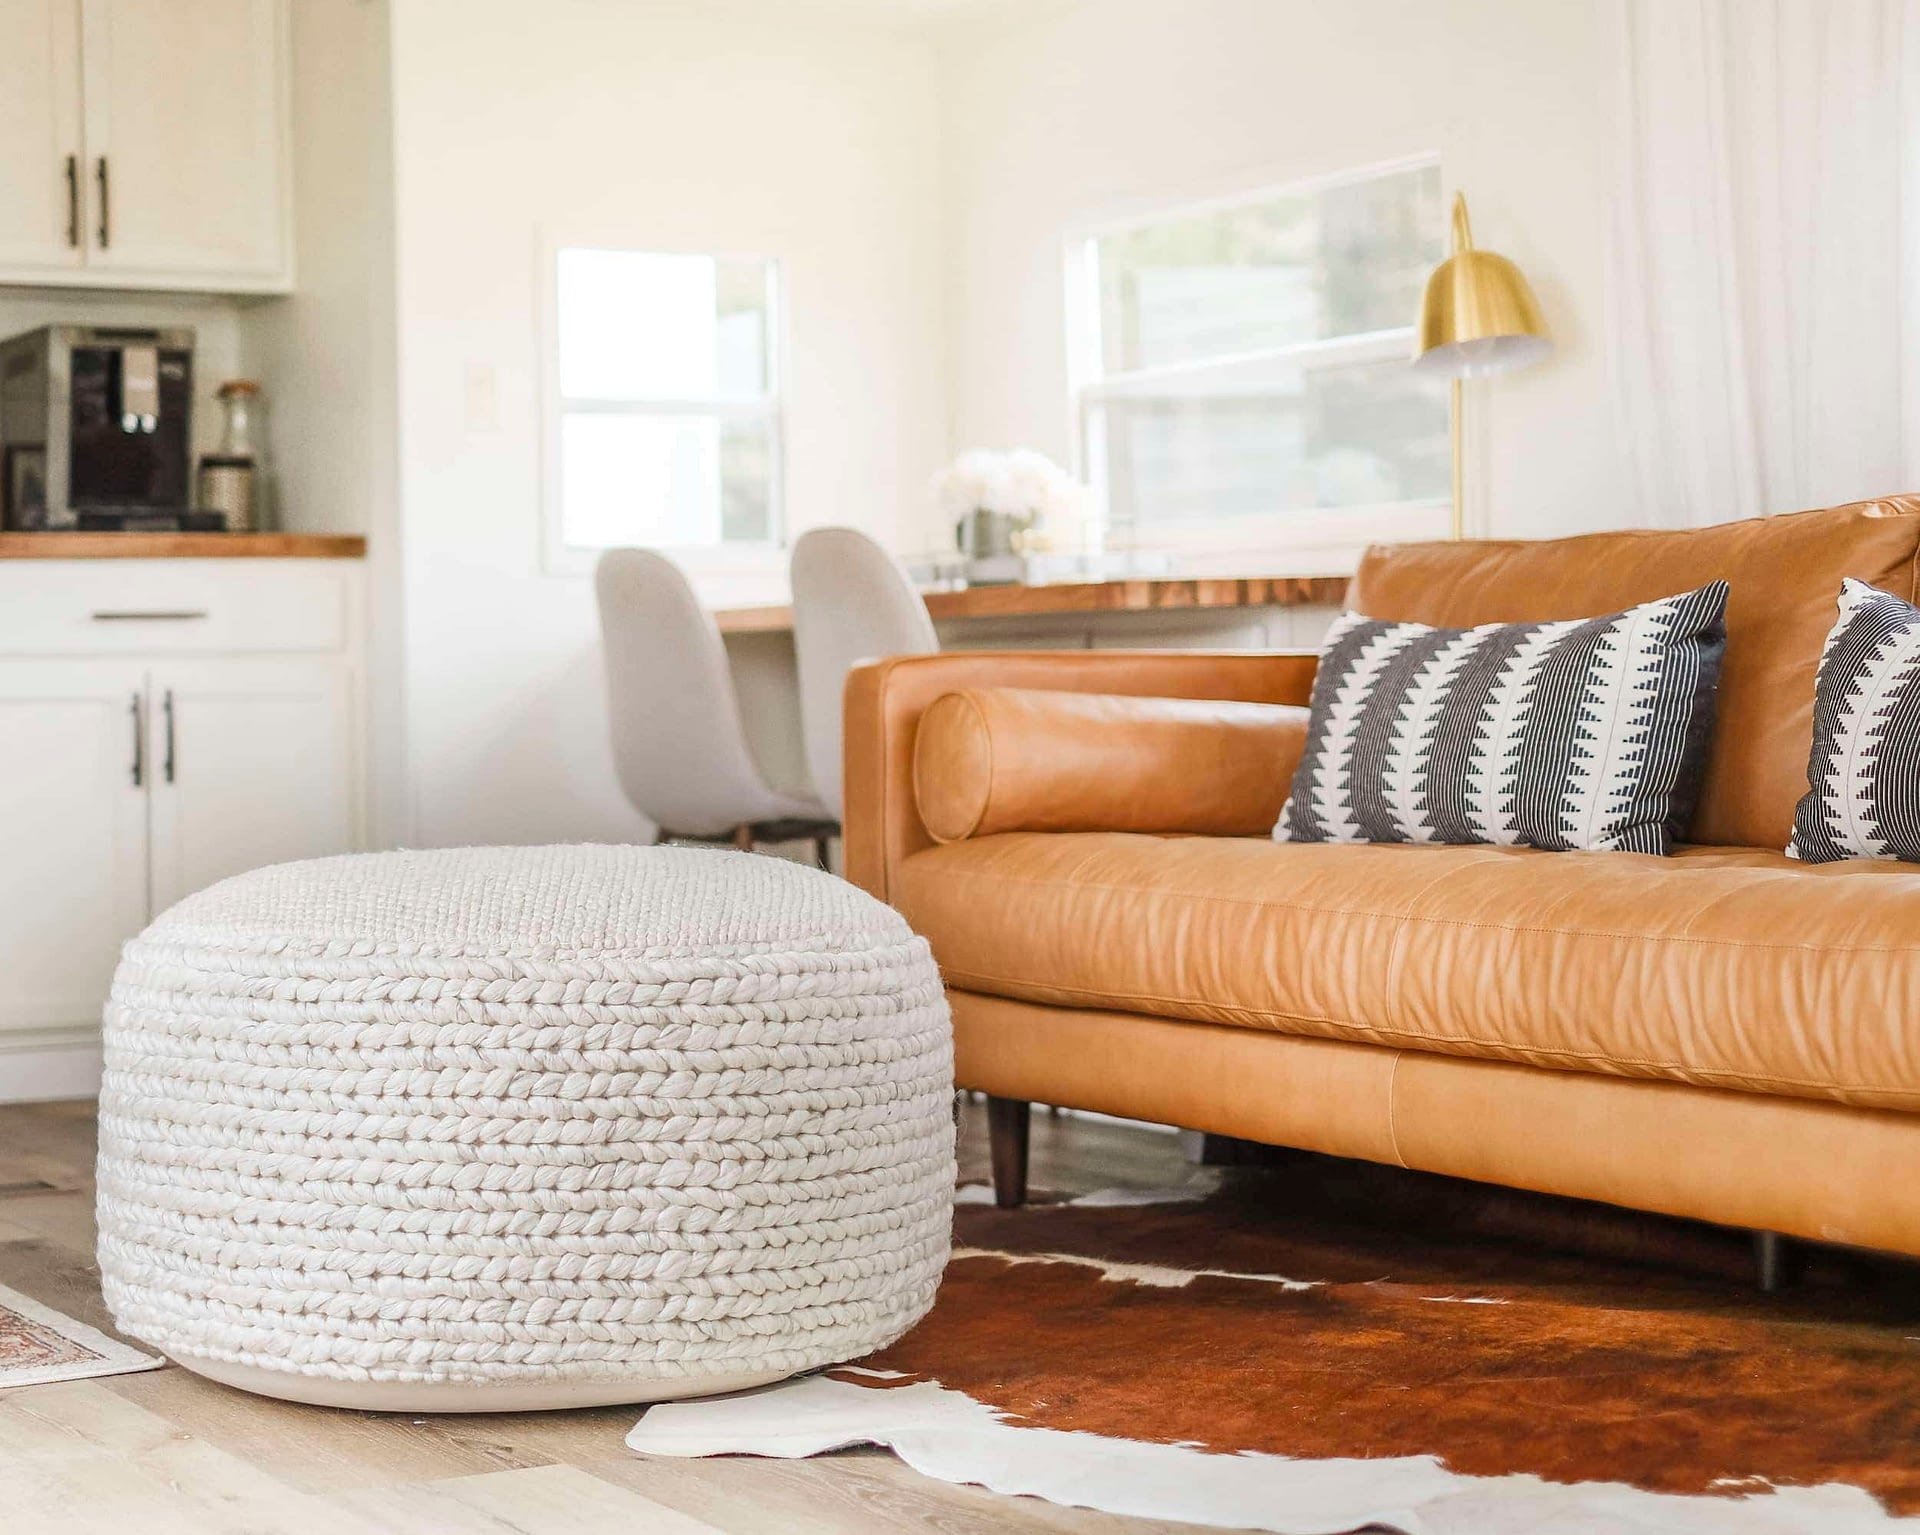 Why You Need A Pouf For Your Living Room + How to Style It 3 Ways